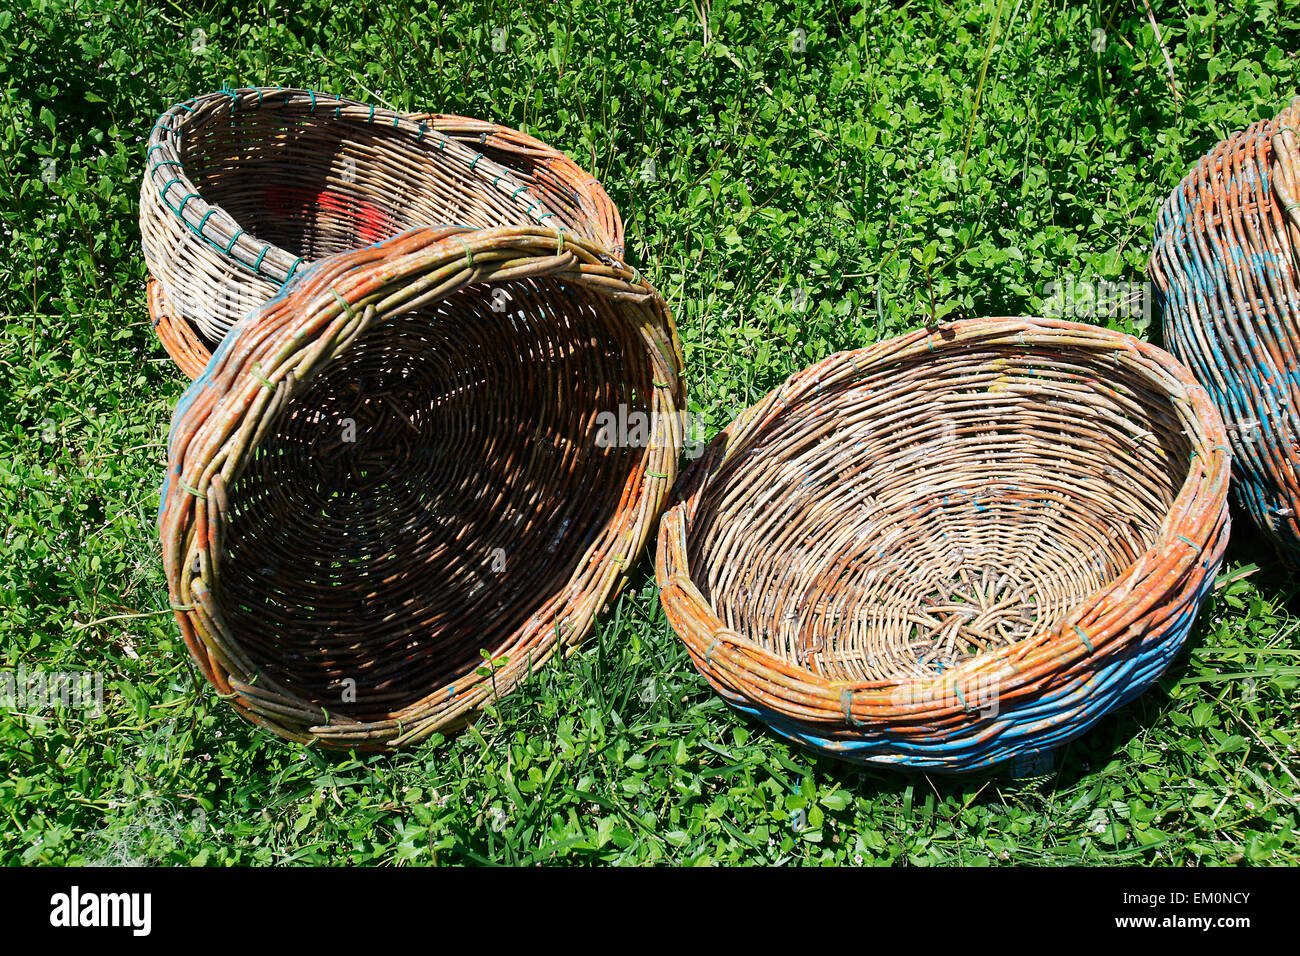 Baskets used by fishermen lay out to dry on the grass; Lamno, Aceh Province, Sumatra, Indonesia Stock Photo